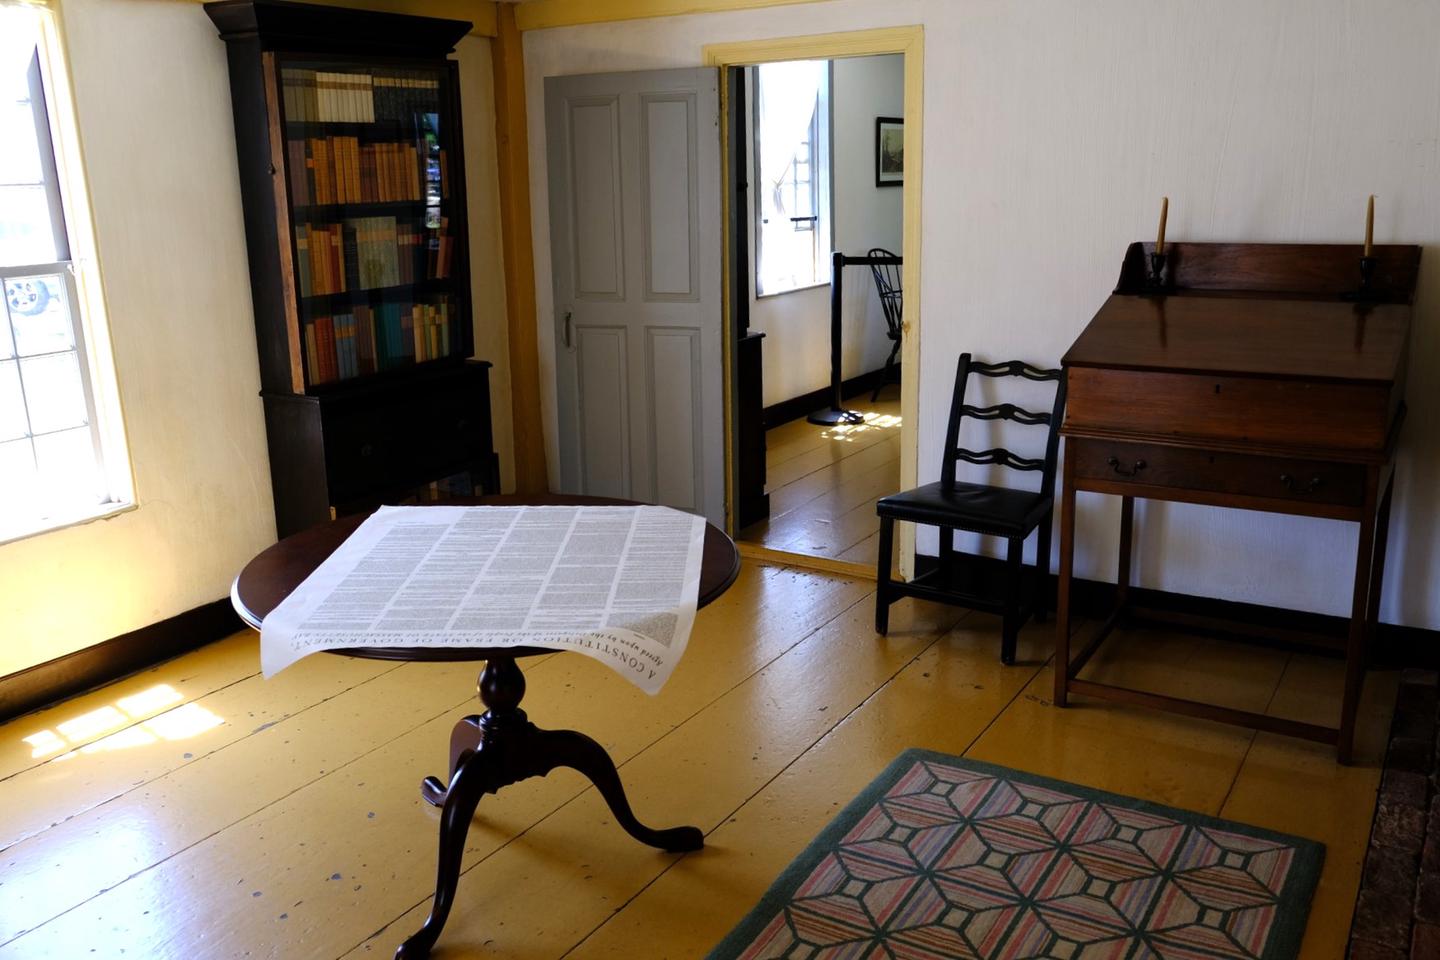 A room with painted yellow floor, circular table in the middle with large broadside on top, standing 18th-century style desk and chair on the right, and bookcase and window on the left. The law office of John Adams inside the John Quincy Adams Birthplace. 